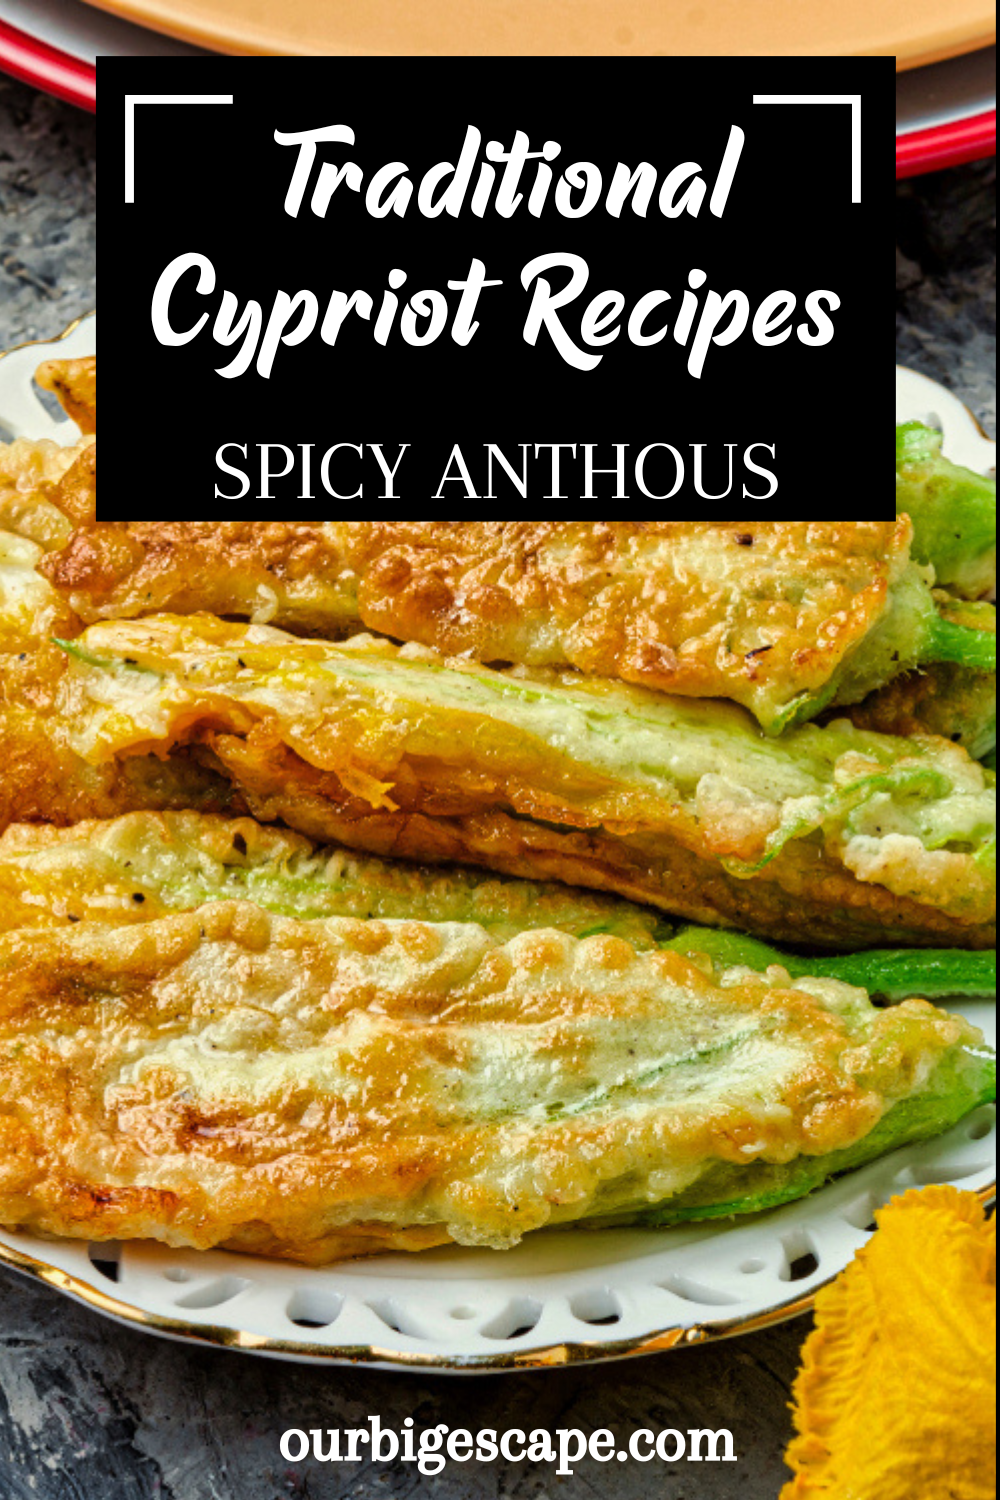 Spicy Anthous – Stuffed Zucchini Flowers - Traditional Cypriot Recipes